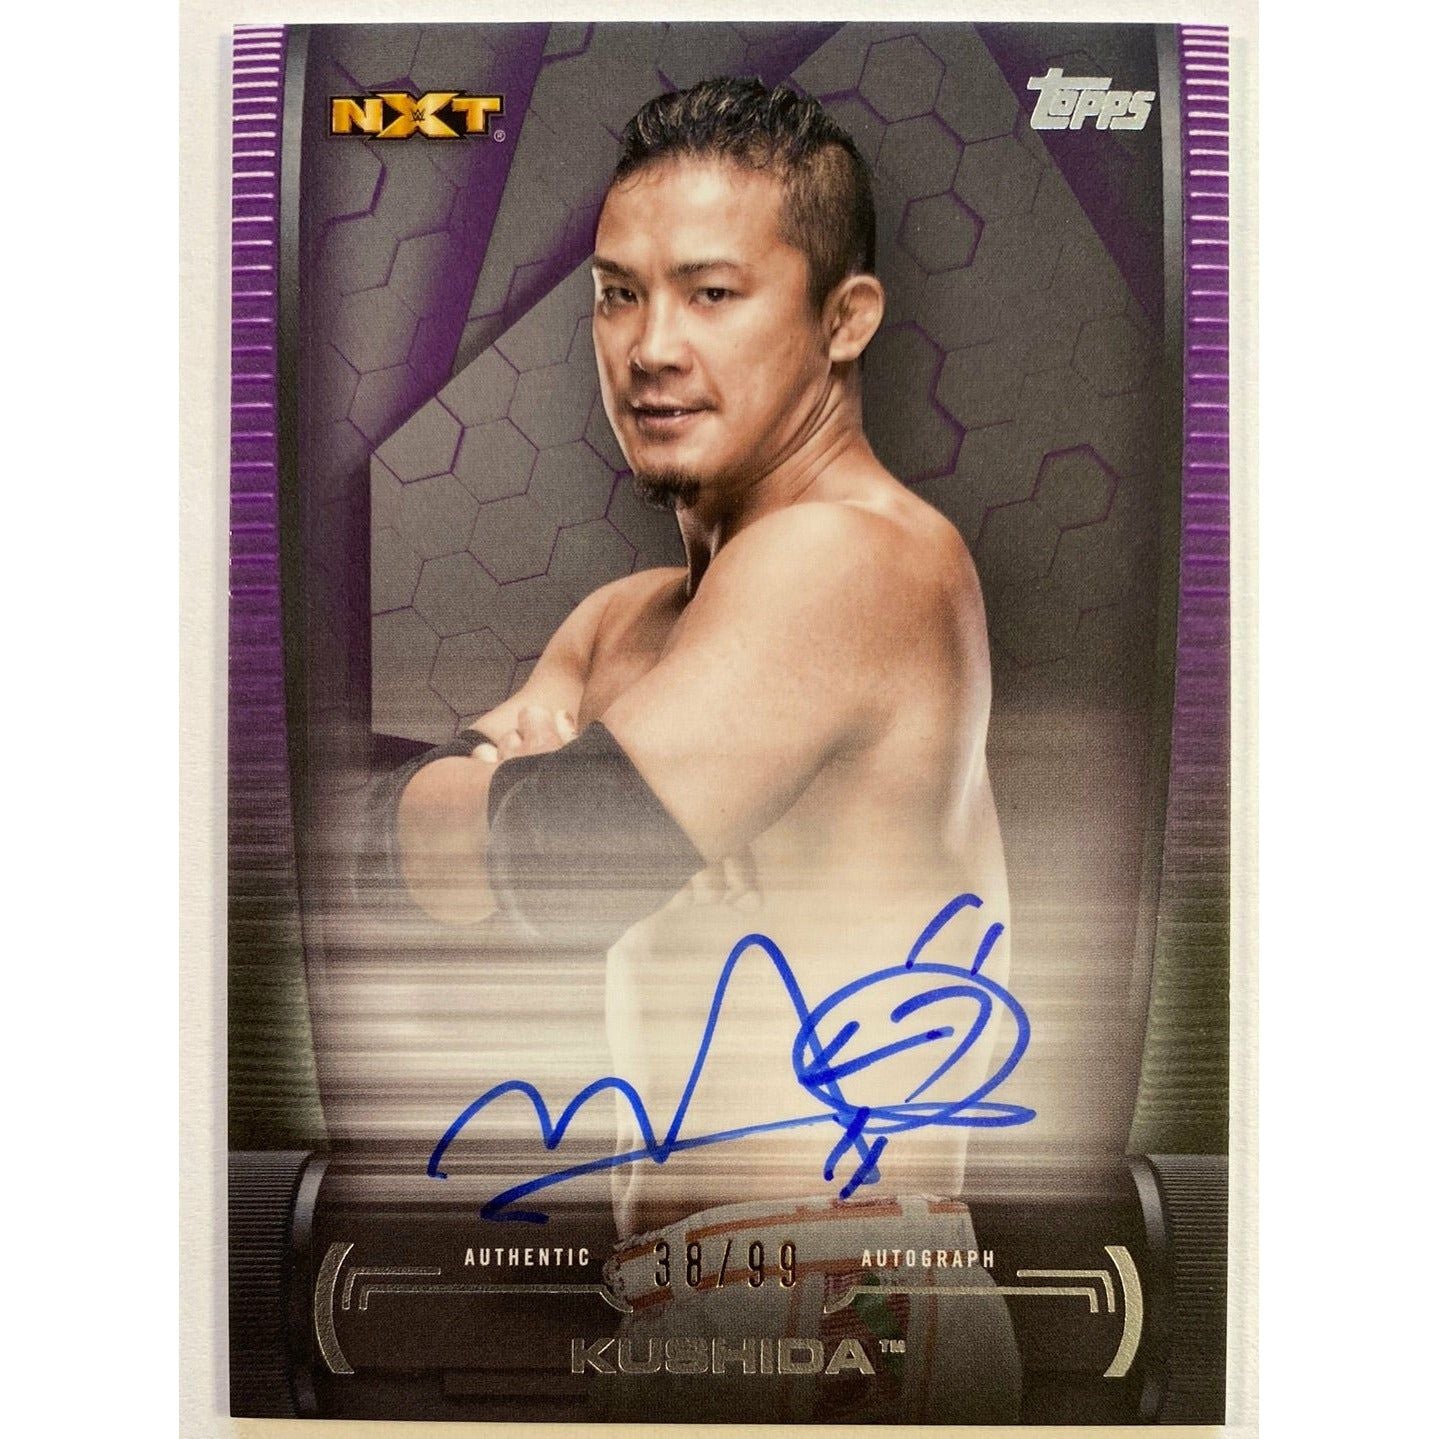  2021 Topps WWE Undisputed Kushida Purple Auto /99  Local Legends Cards & Collectibles